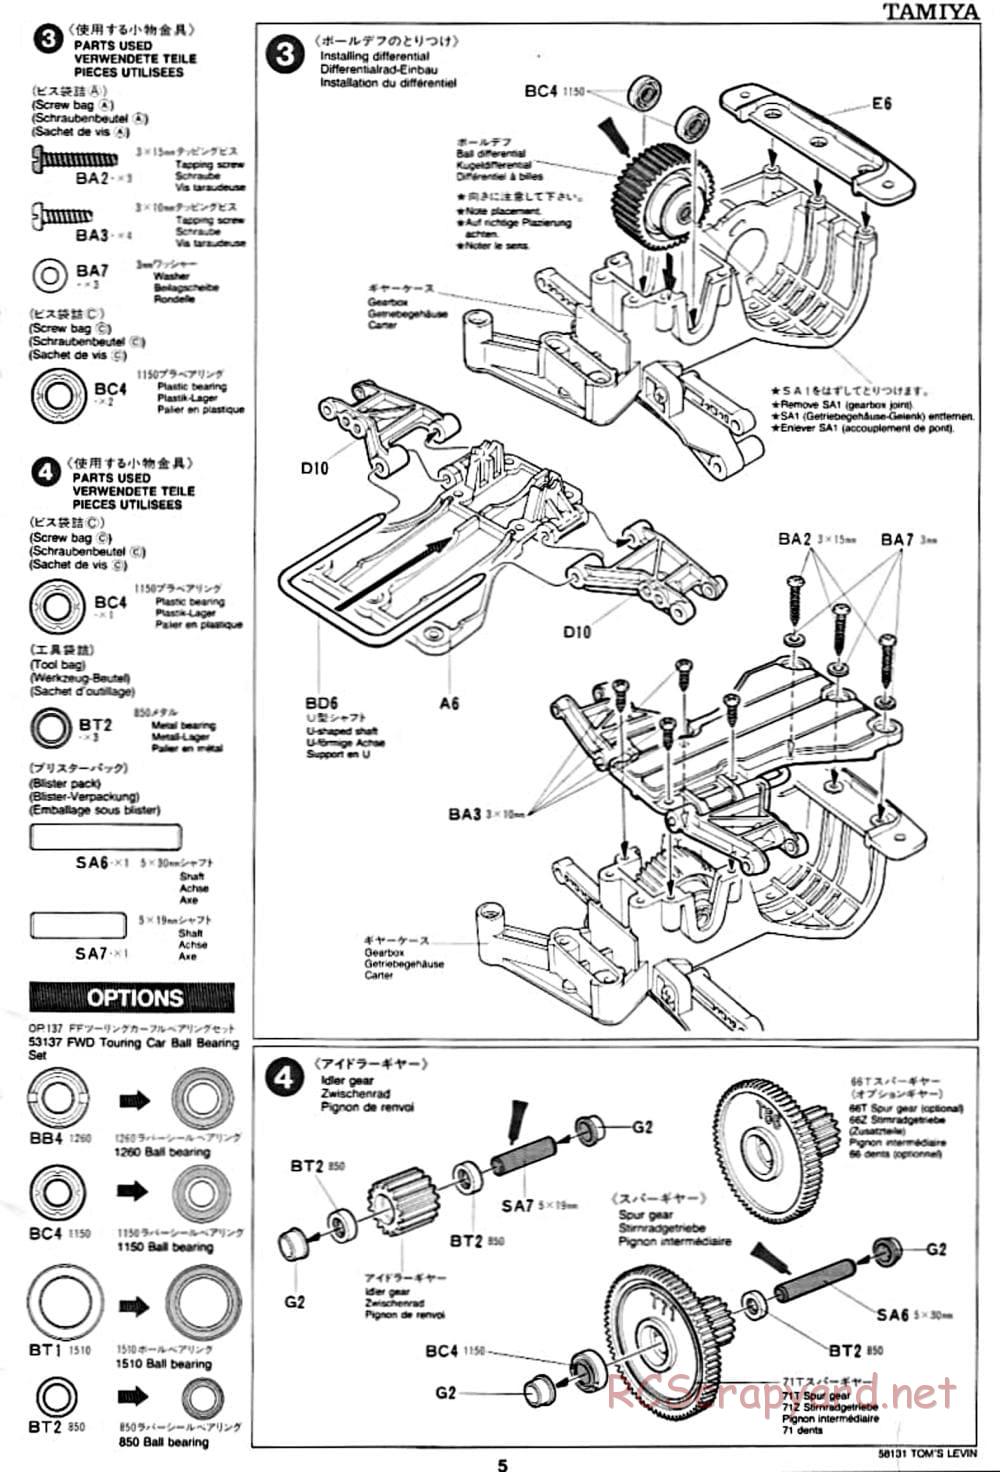 Tamiya - Toyota Tom's Levin - FF-01 Chassis - Manual - Page 5